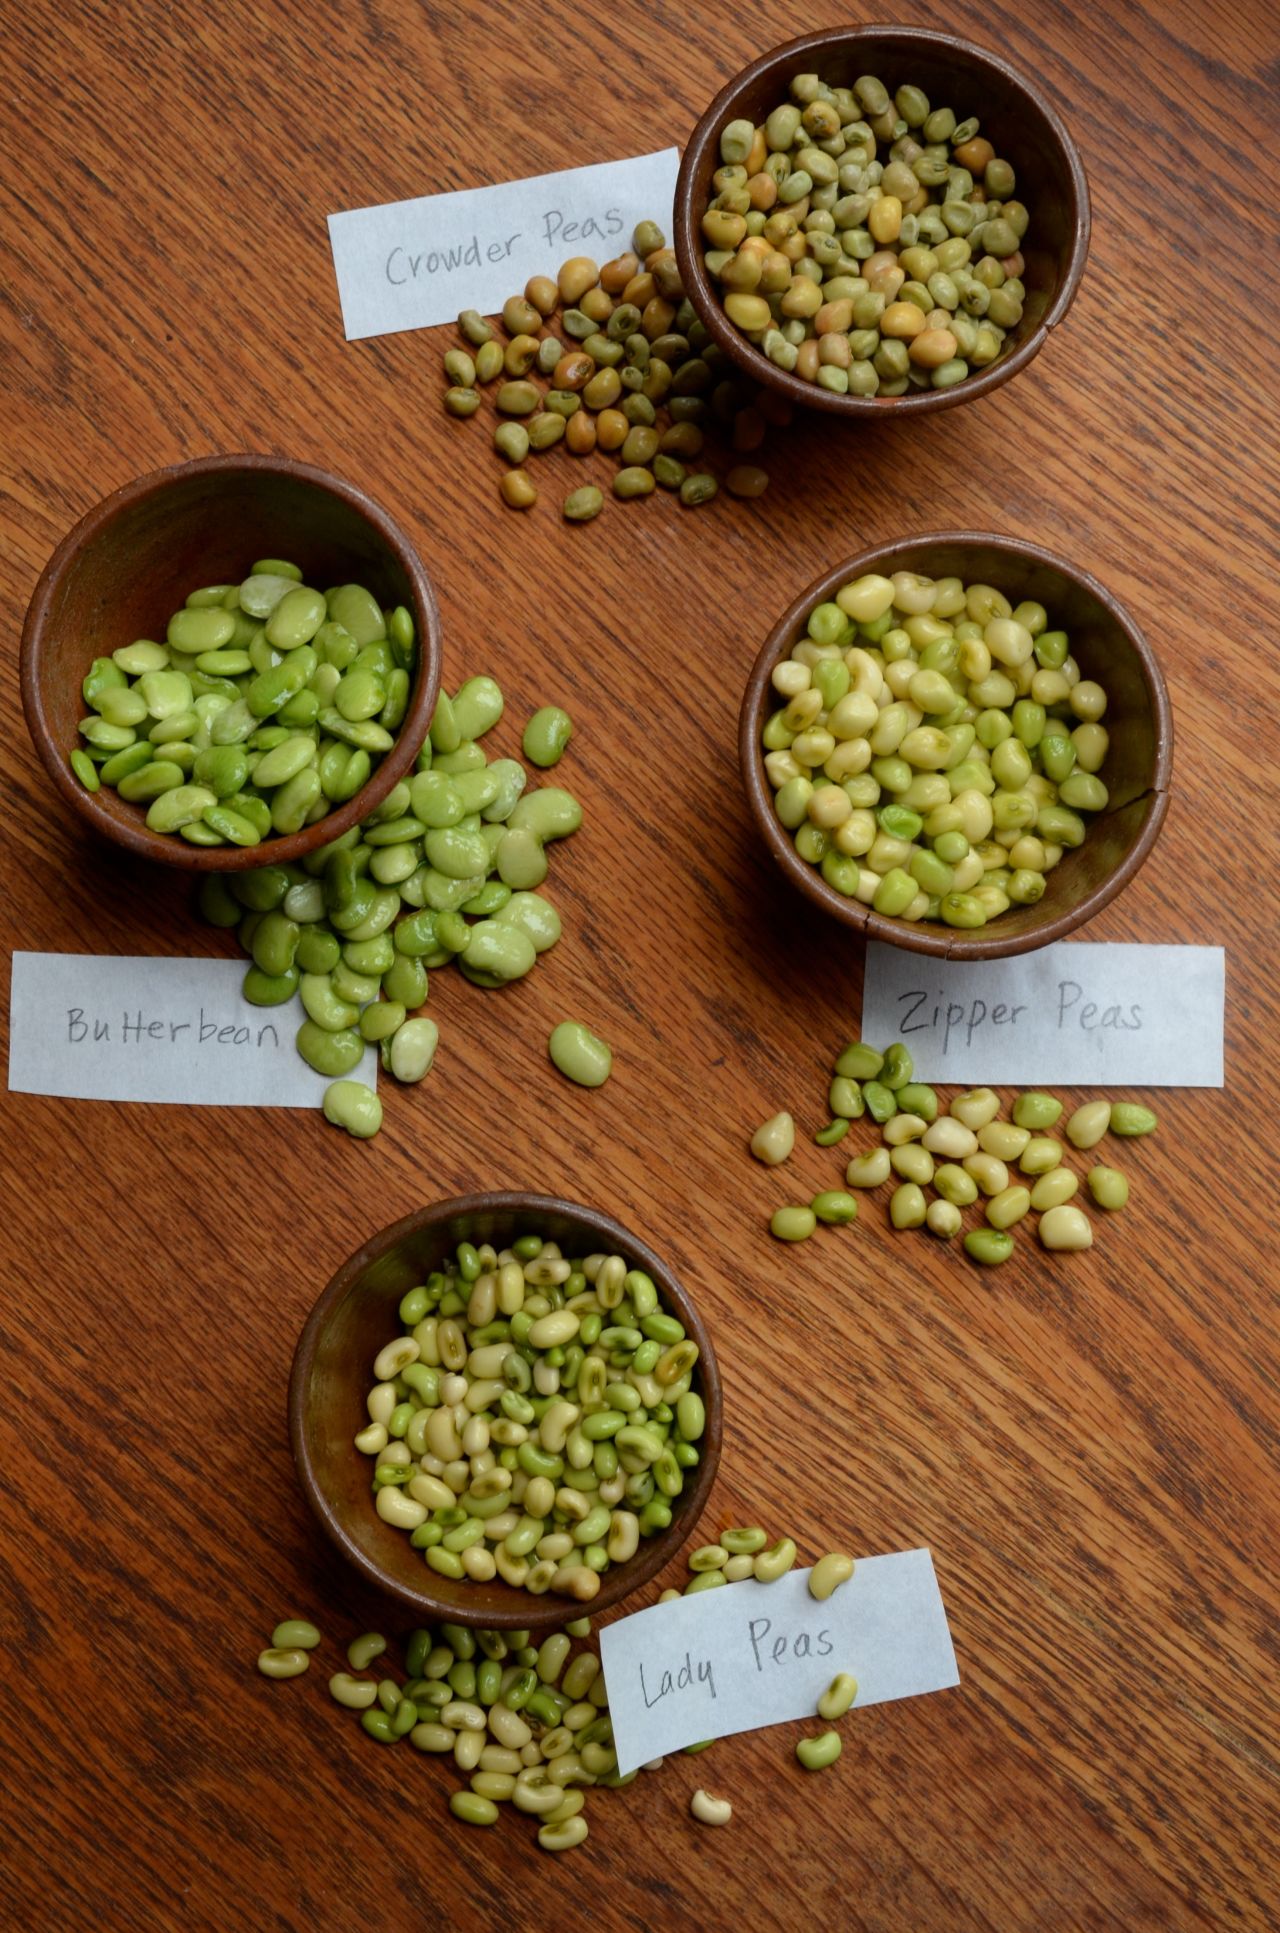  Small-sized pea and pod types are referred to as "lady peas."